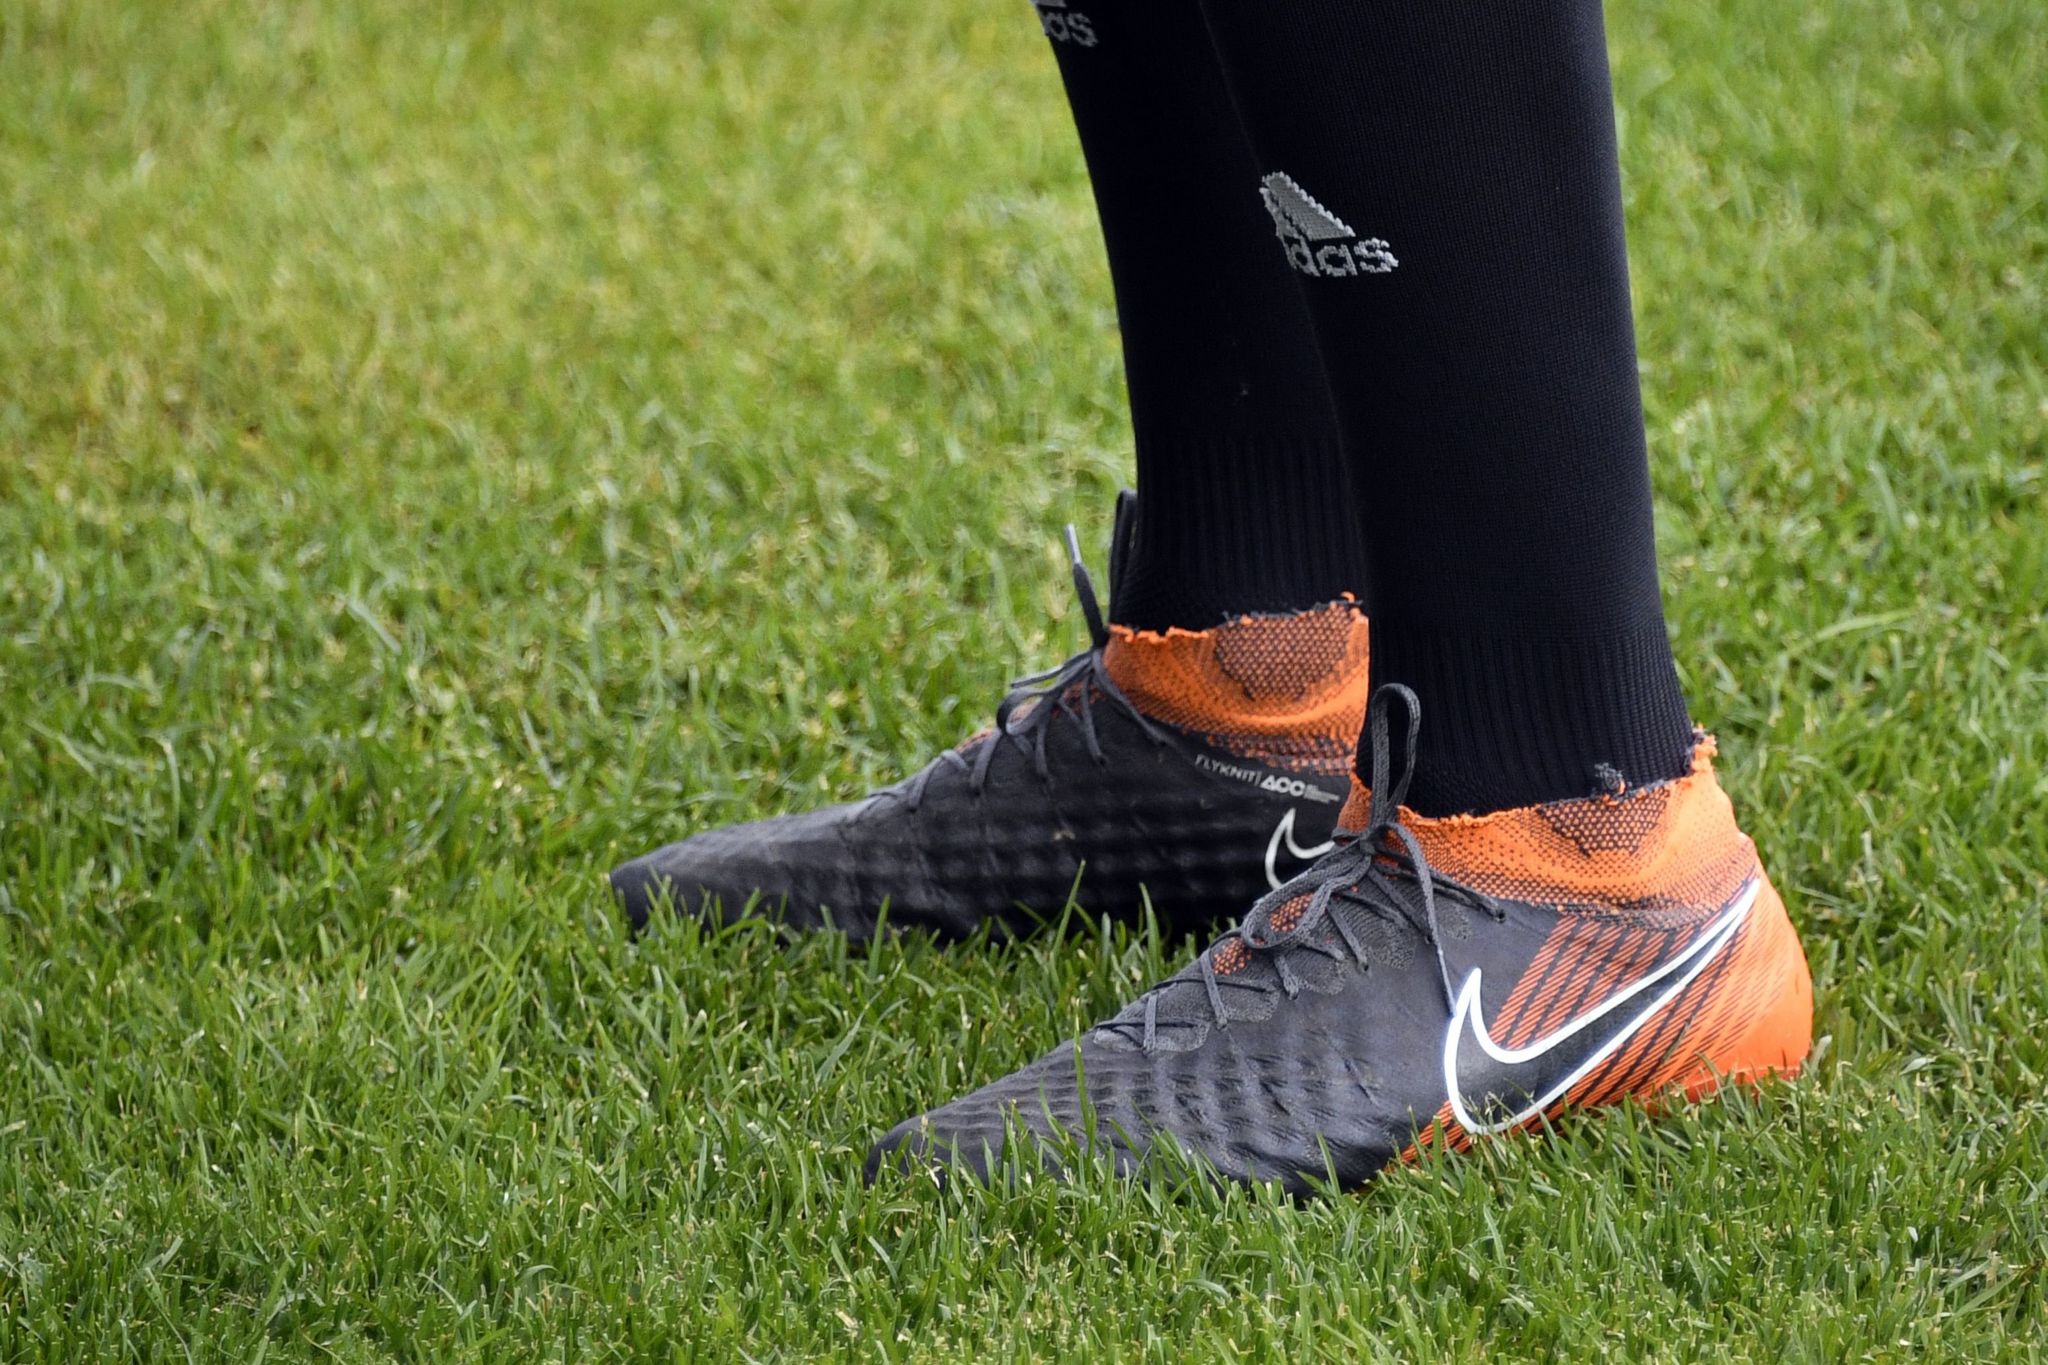 A picture taken on 14 June 2018 shows the football shoes of Iran's midfielder Saeid Ezatolahi upon his arrival to take part in a training session in Bakovka, outside Moscow, ahead of the Russia 2018 World Cup.